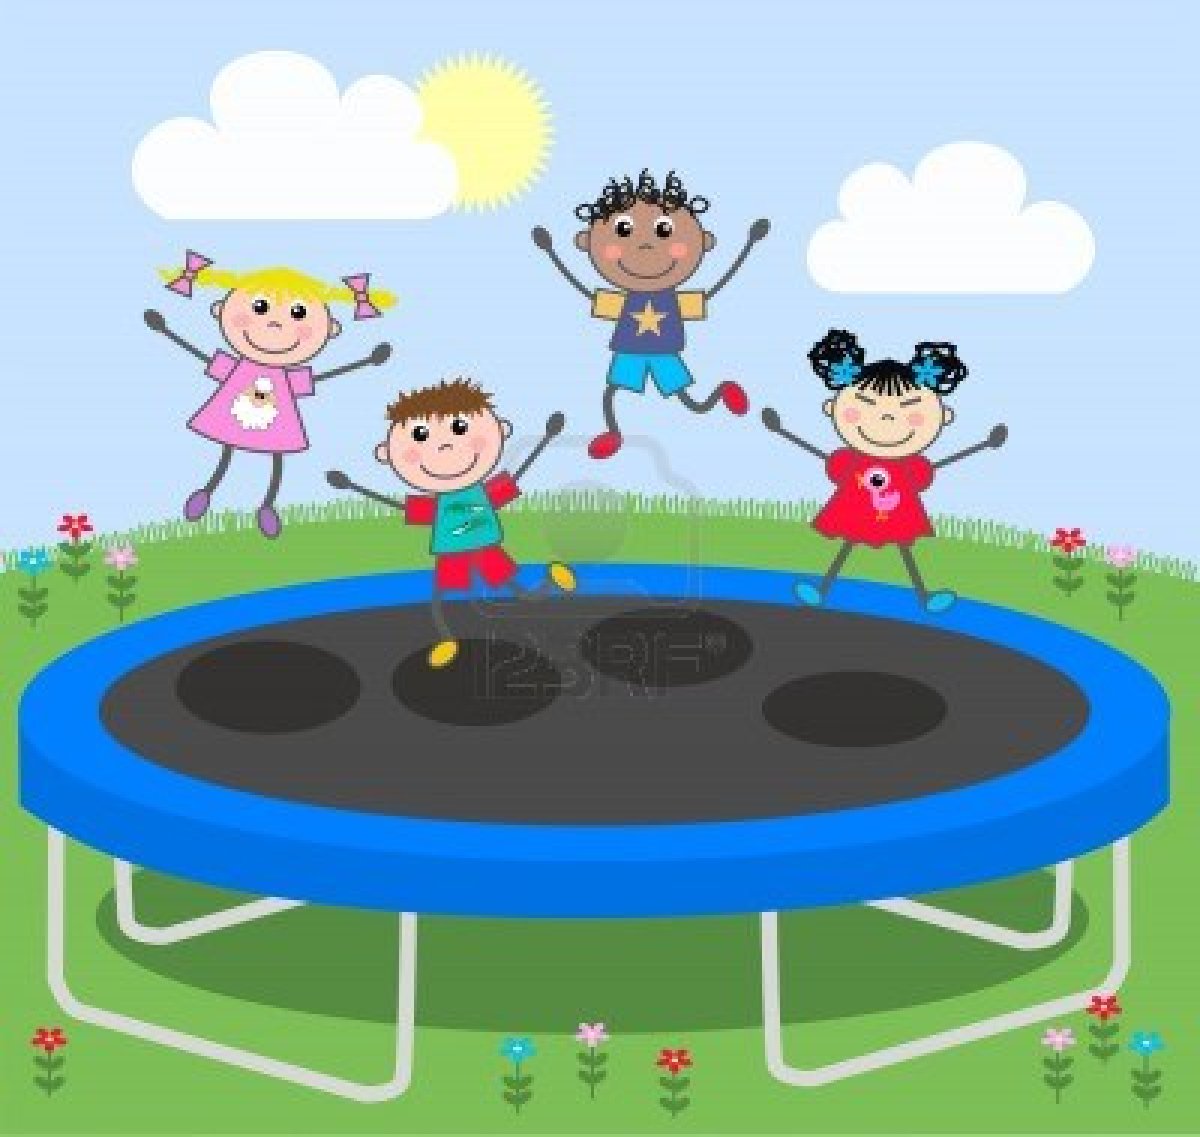 The Fun And The Enjoyment A Trampoline Gives You After Being Safe